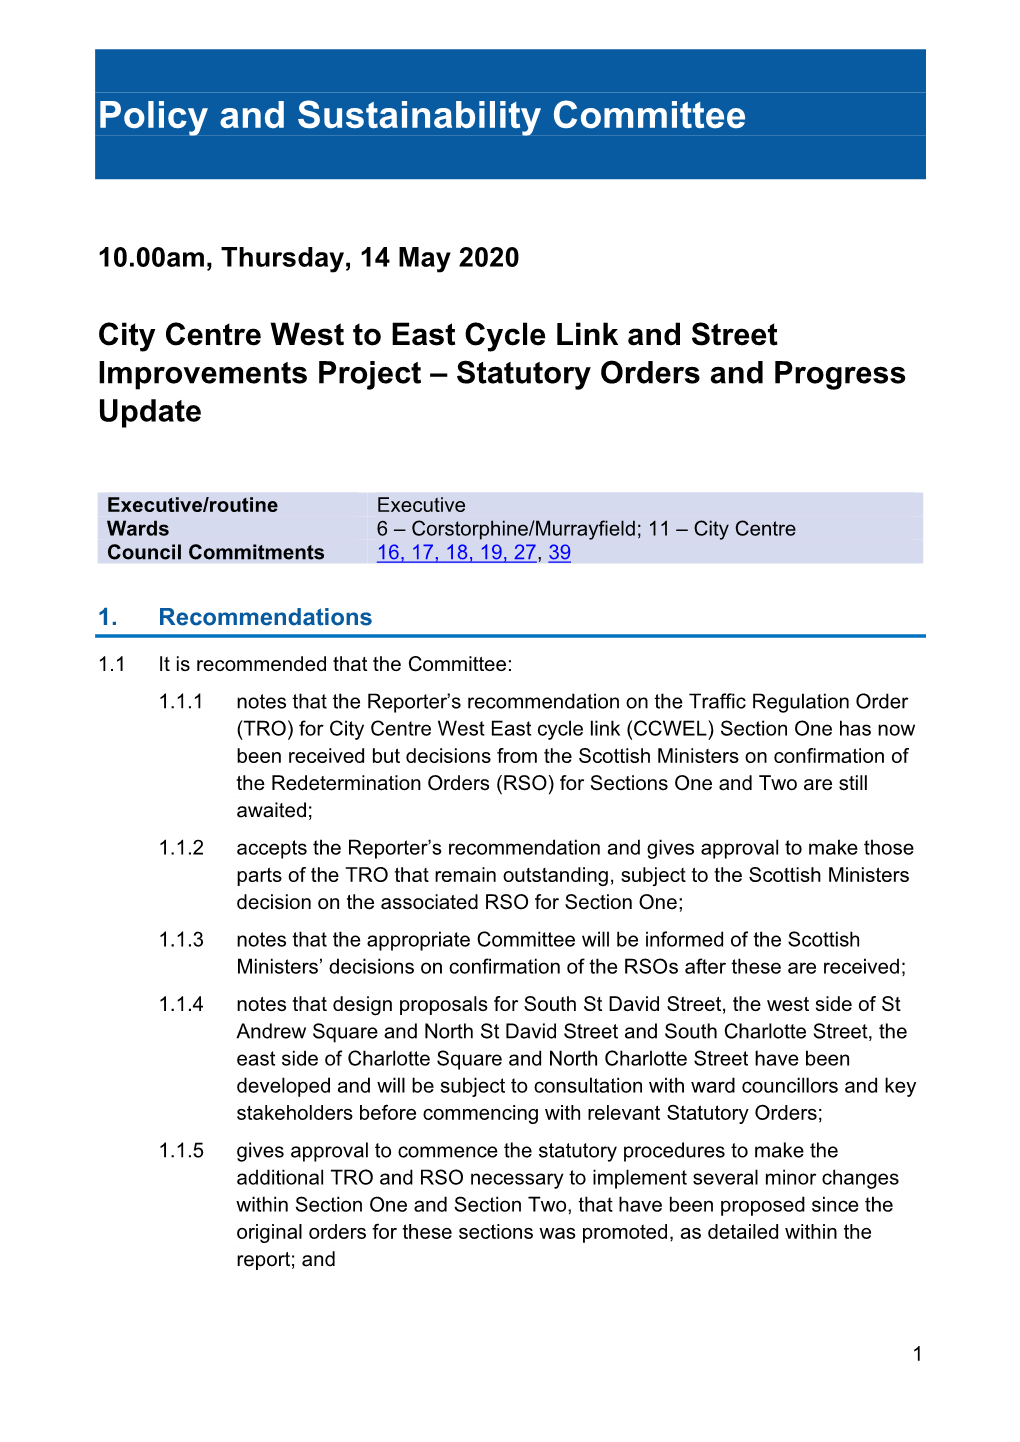 City Centre West to East Cycle Link and Street Improvements Project – Statutory Orders and Progress Update